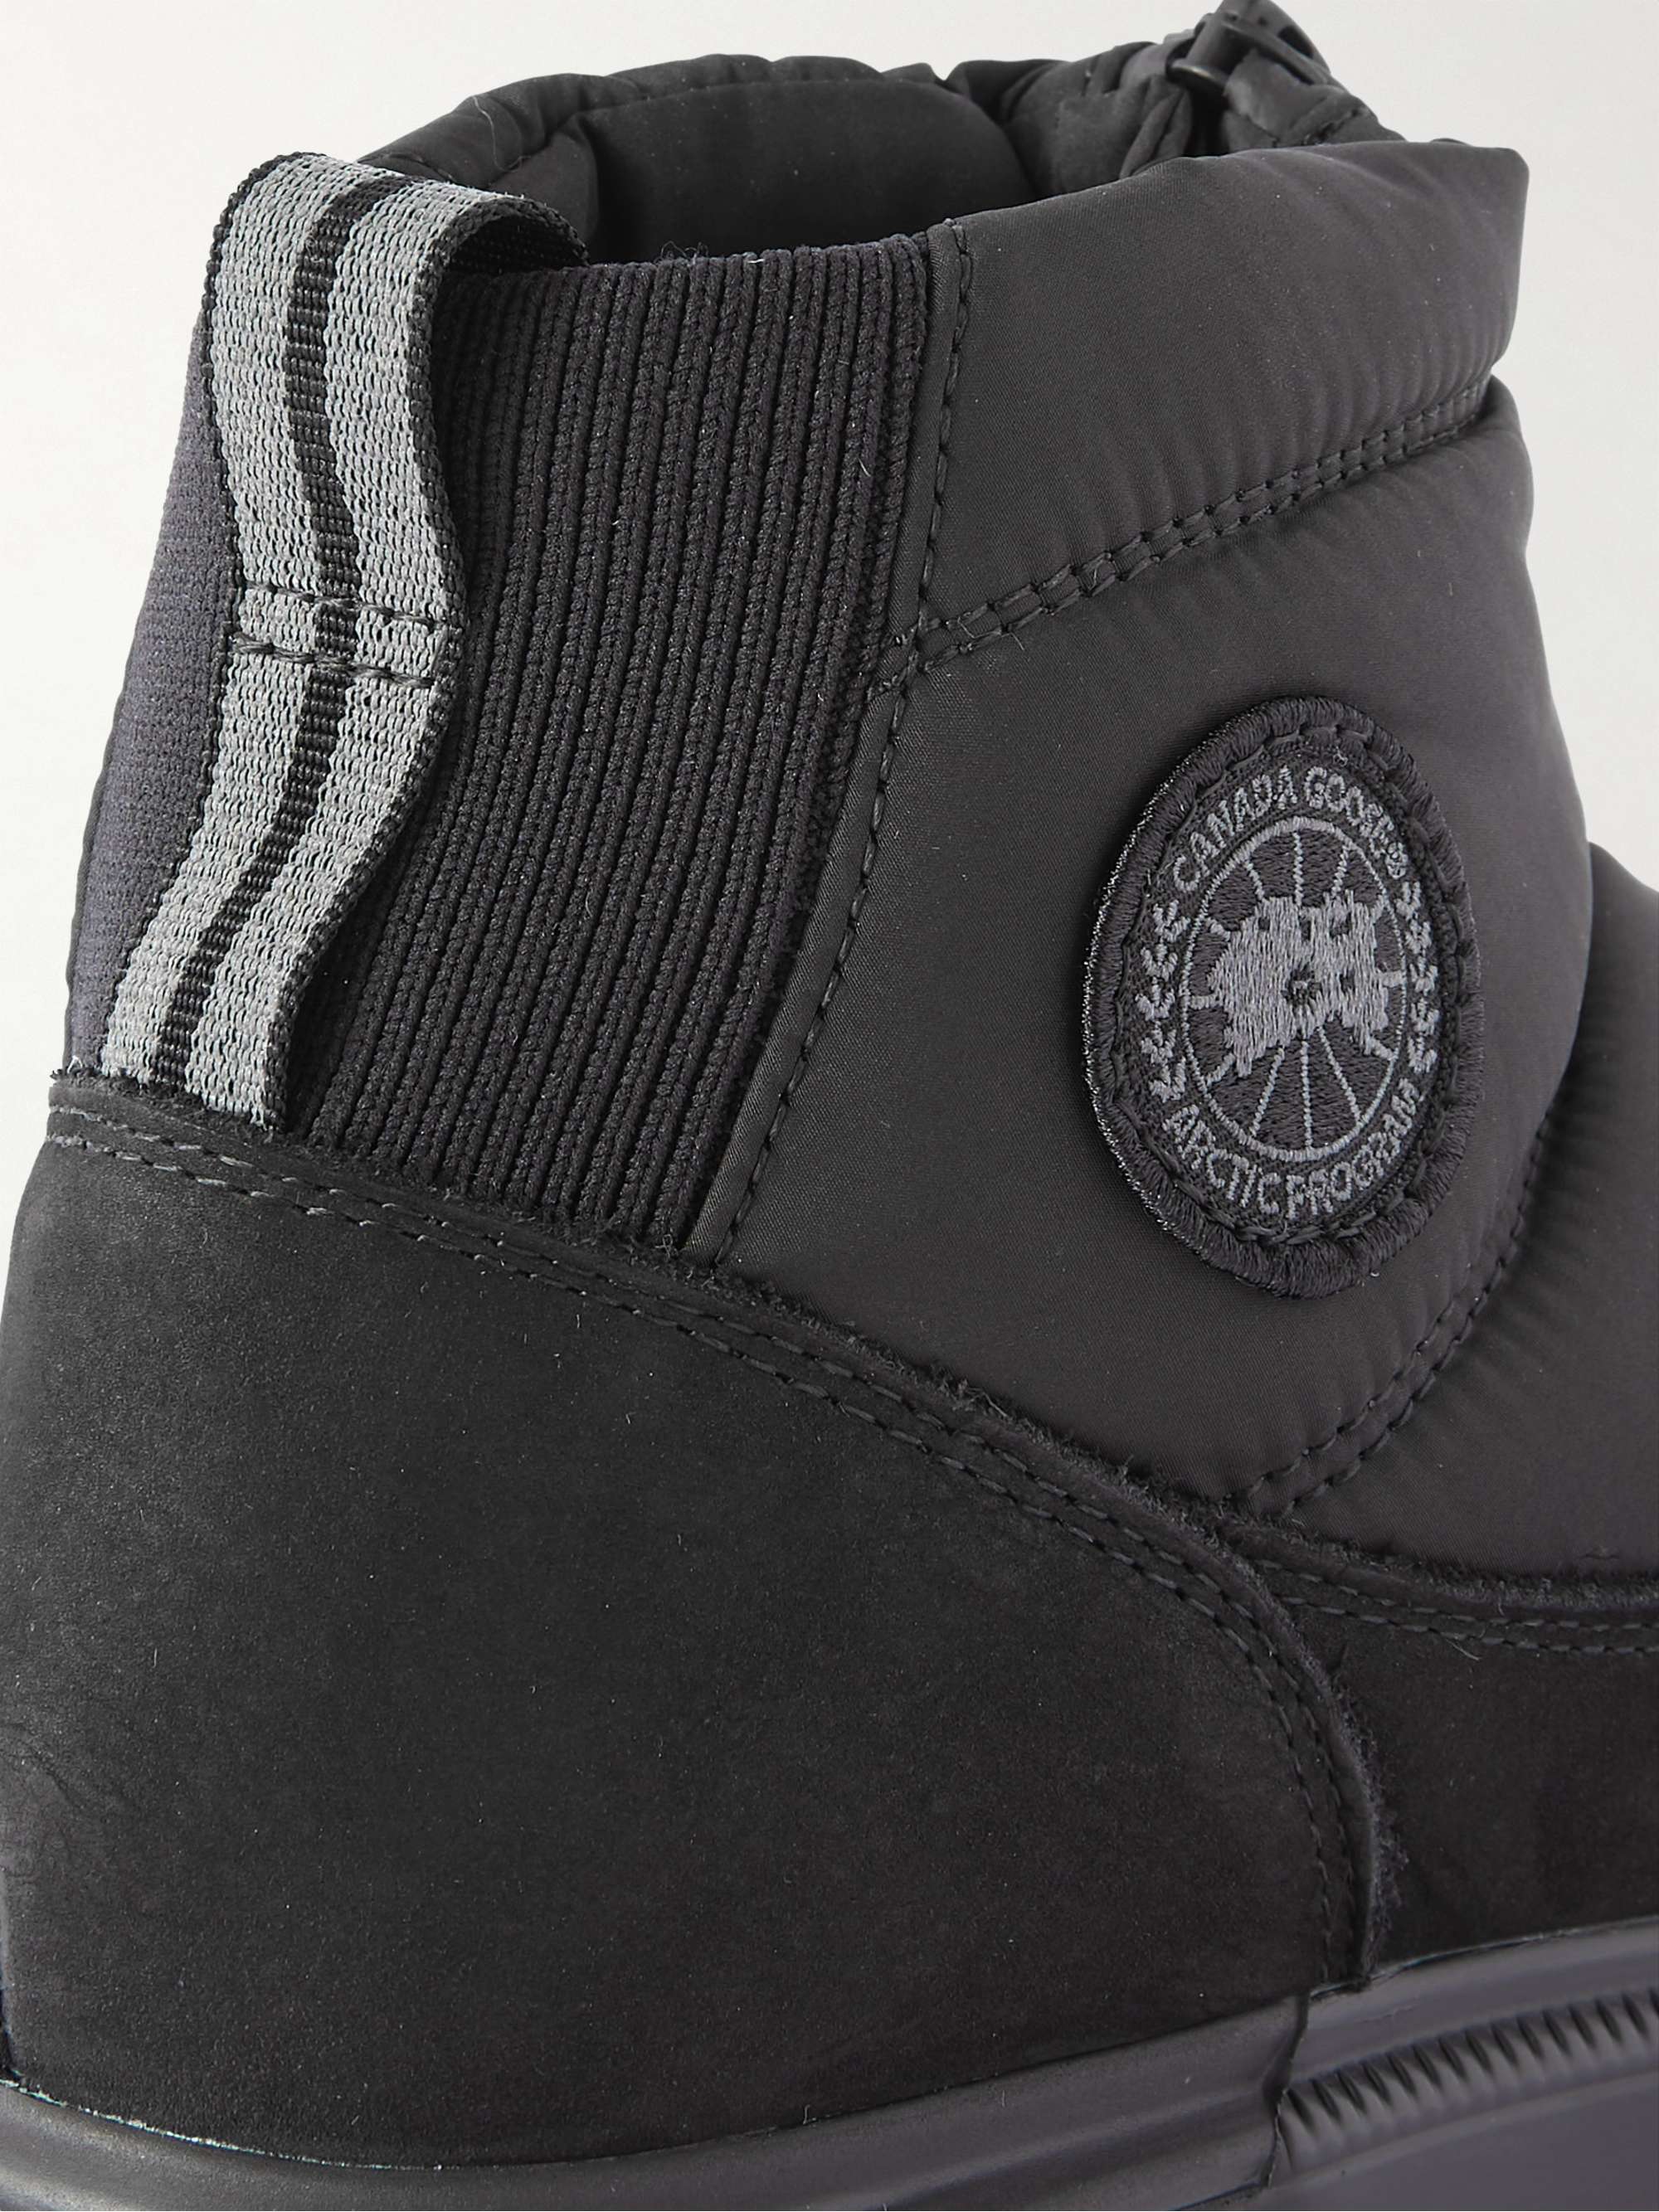 CANADA GOOSE Crofton Suede-Trimmed Quilted Ripstop Boots